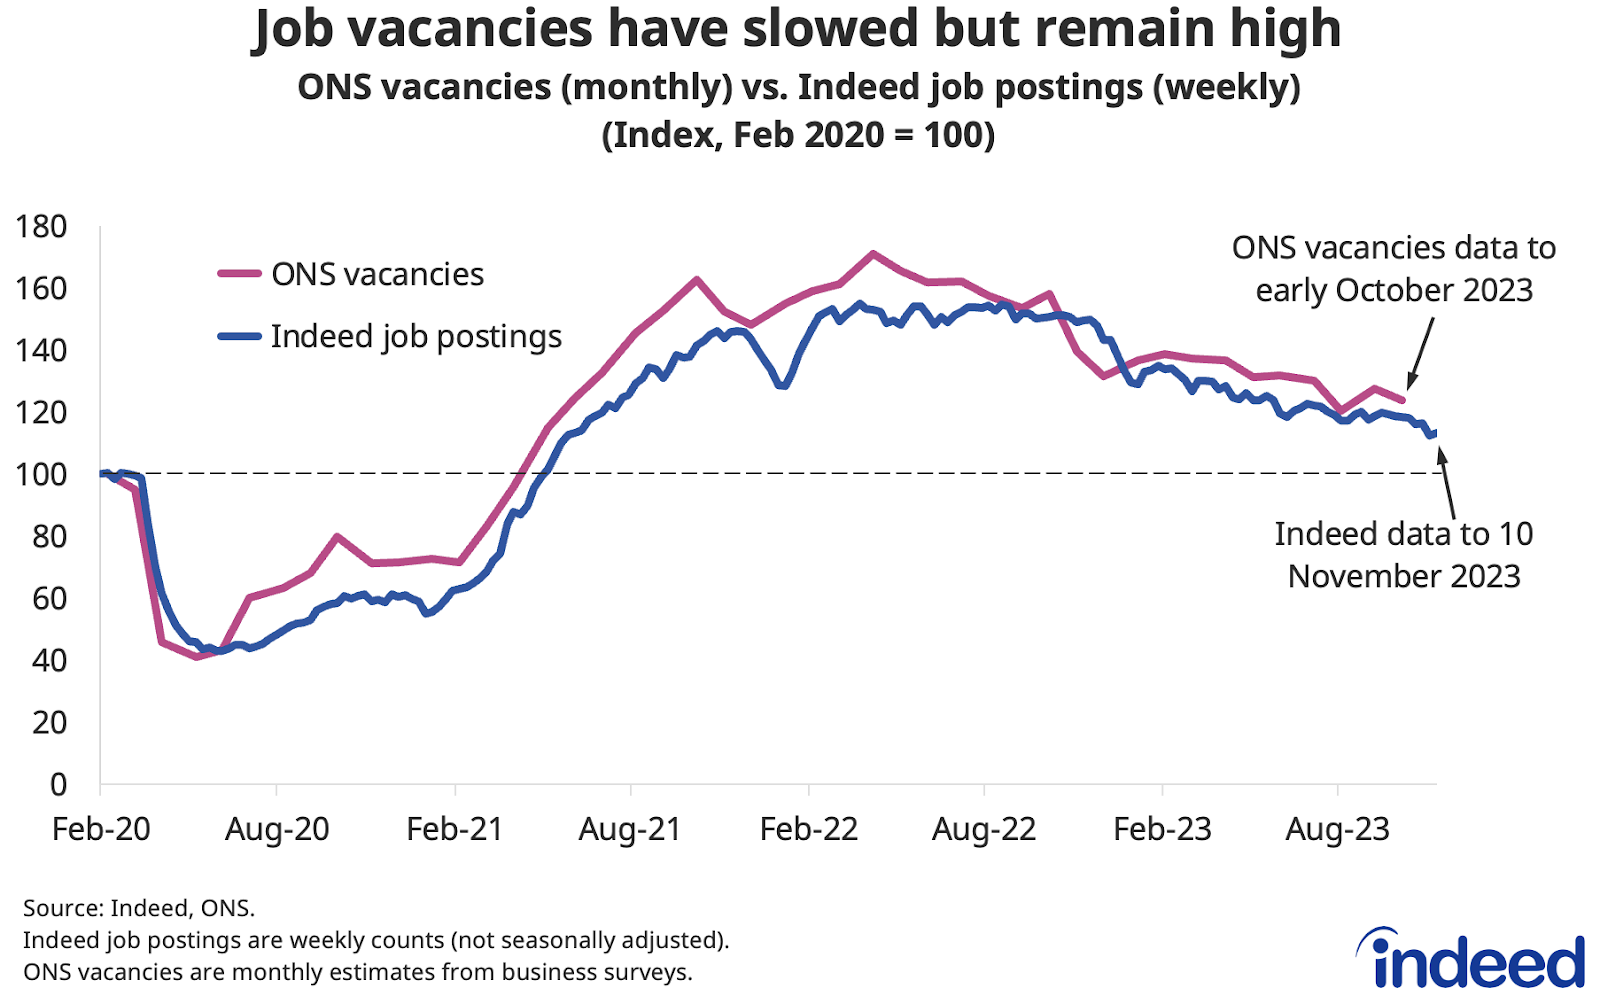 Chart titled “Job vacancies have slowed but remain high” shows the trend in ONS vacancies and Indeed job postings from February 2020 to November 2023. Both vacancies and postings are down from peaks seen in 2022 but remain above pre-pandemic levels. 